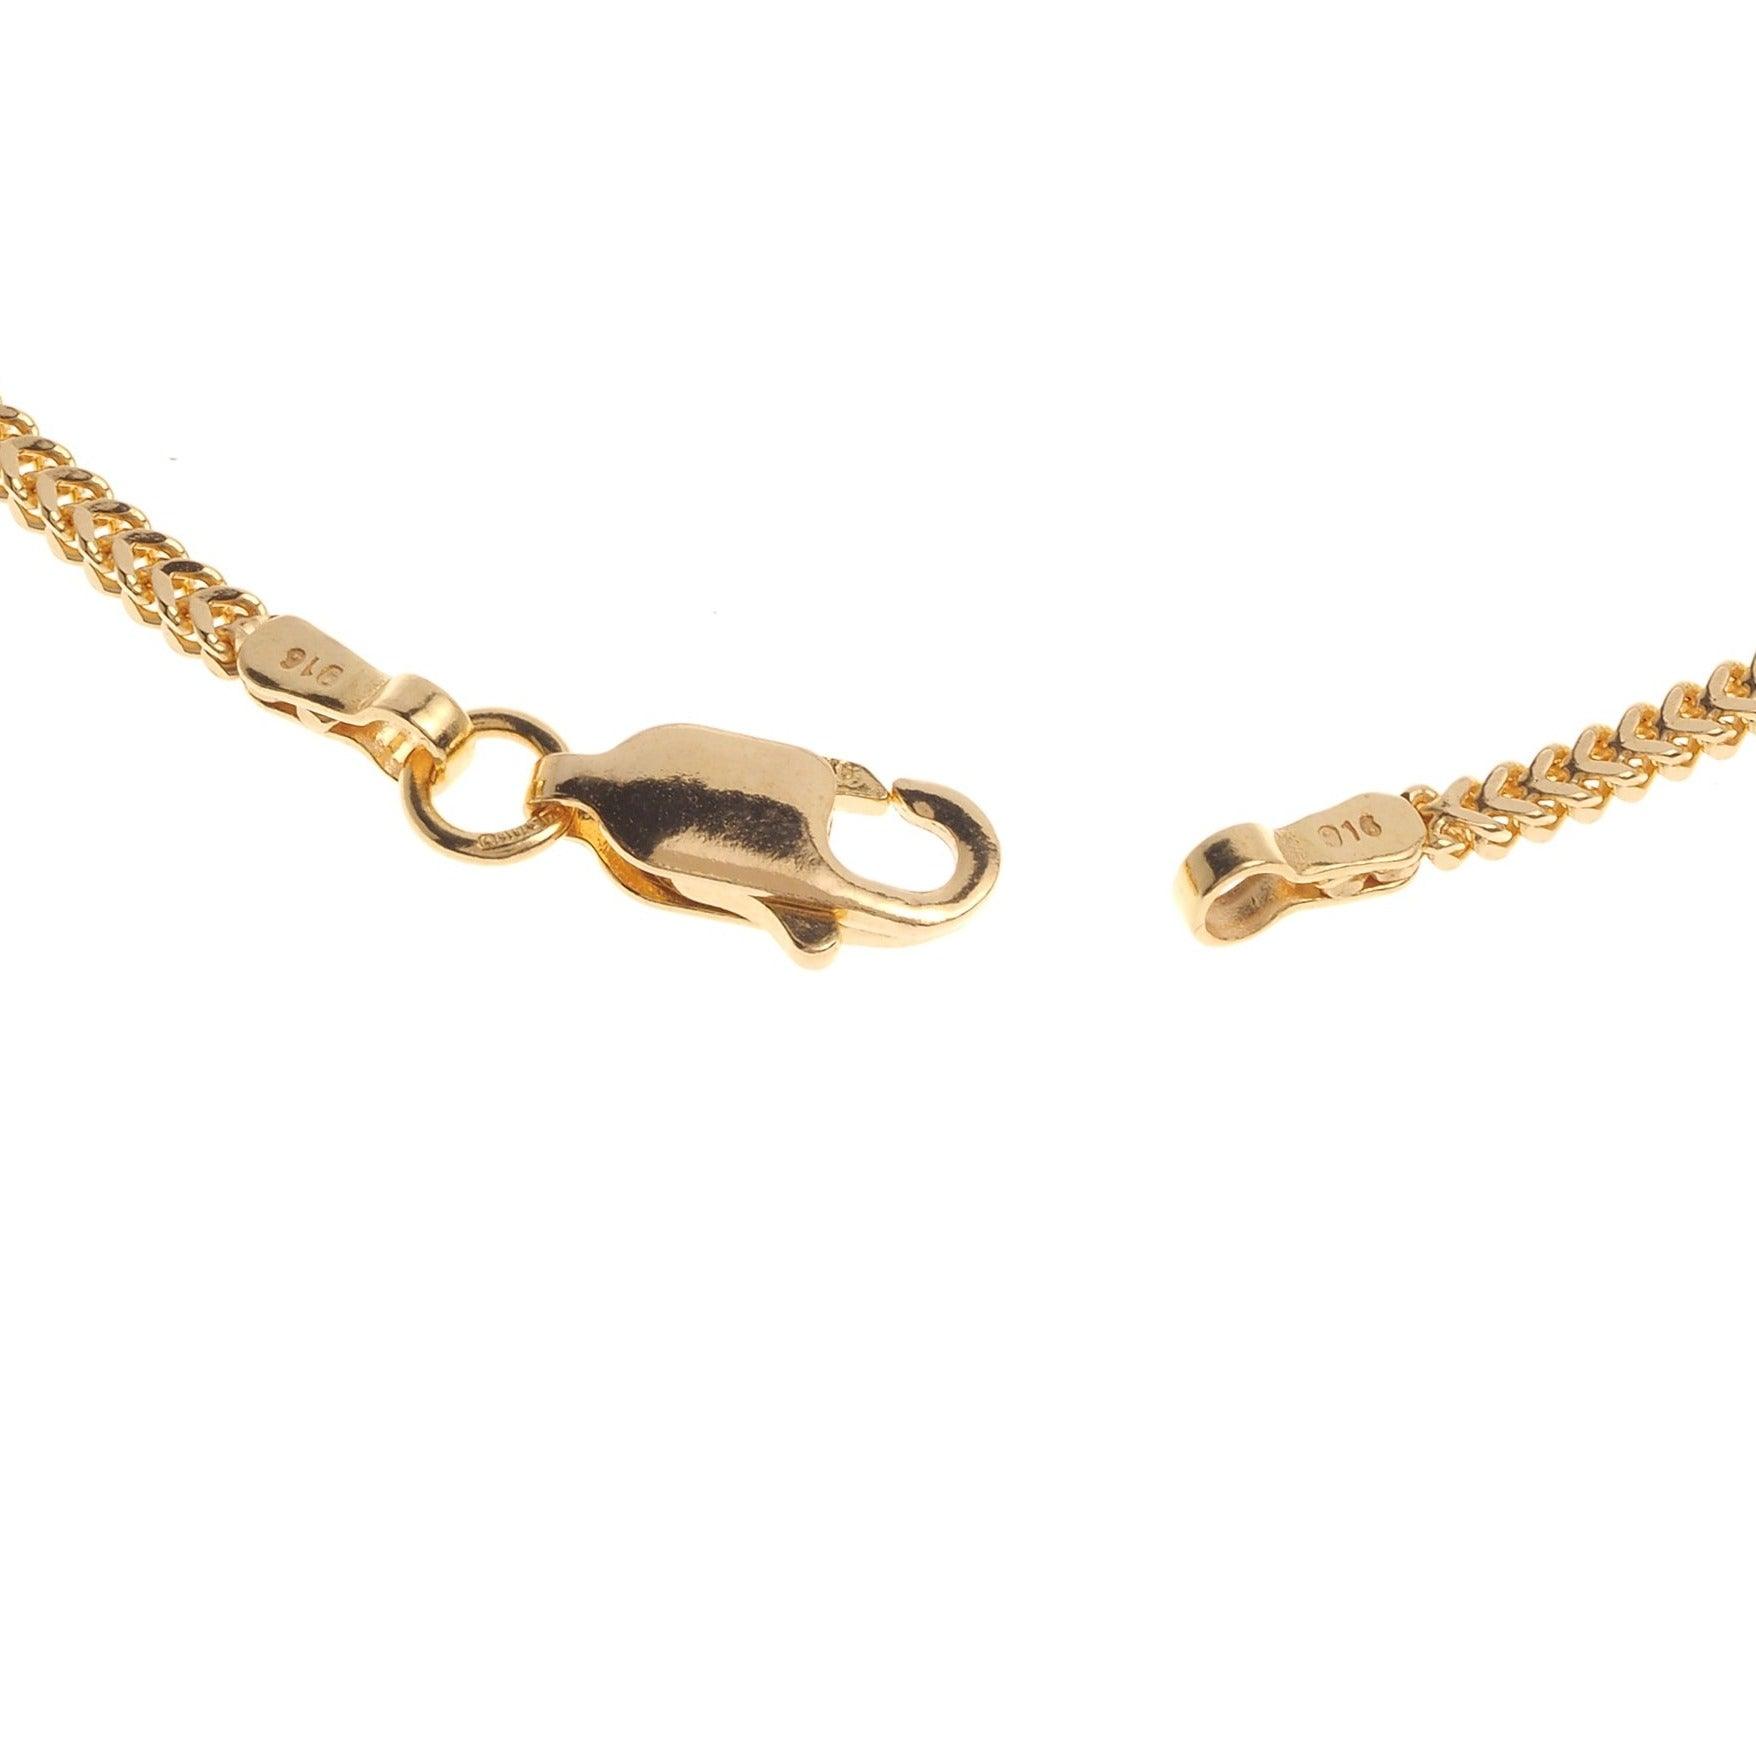 22ct Gold Foxtail Chain with a lobster clasp C-3799